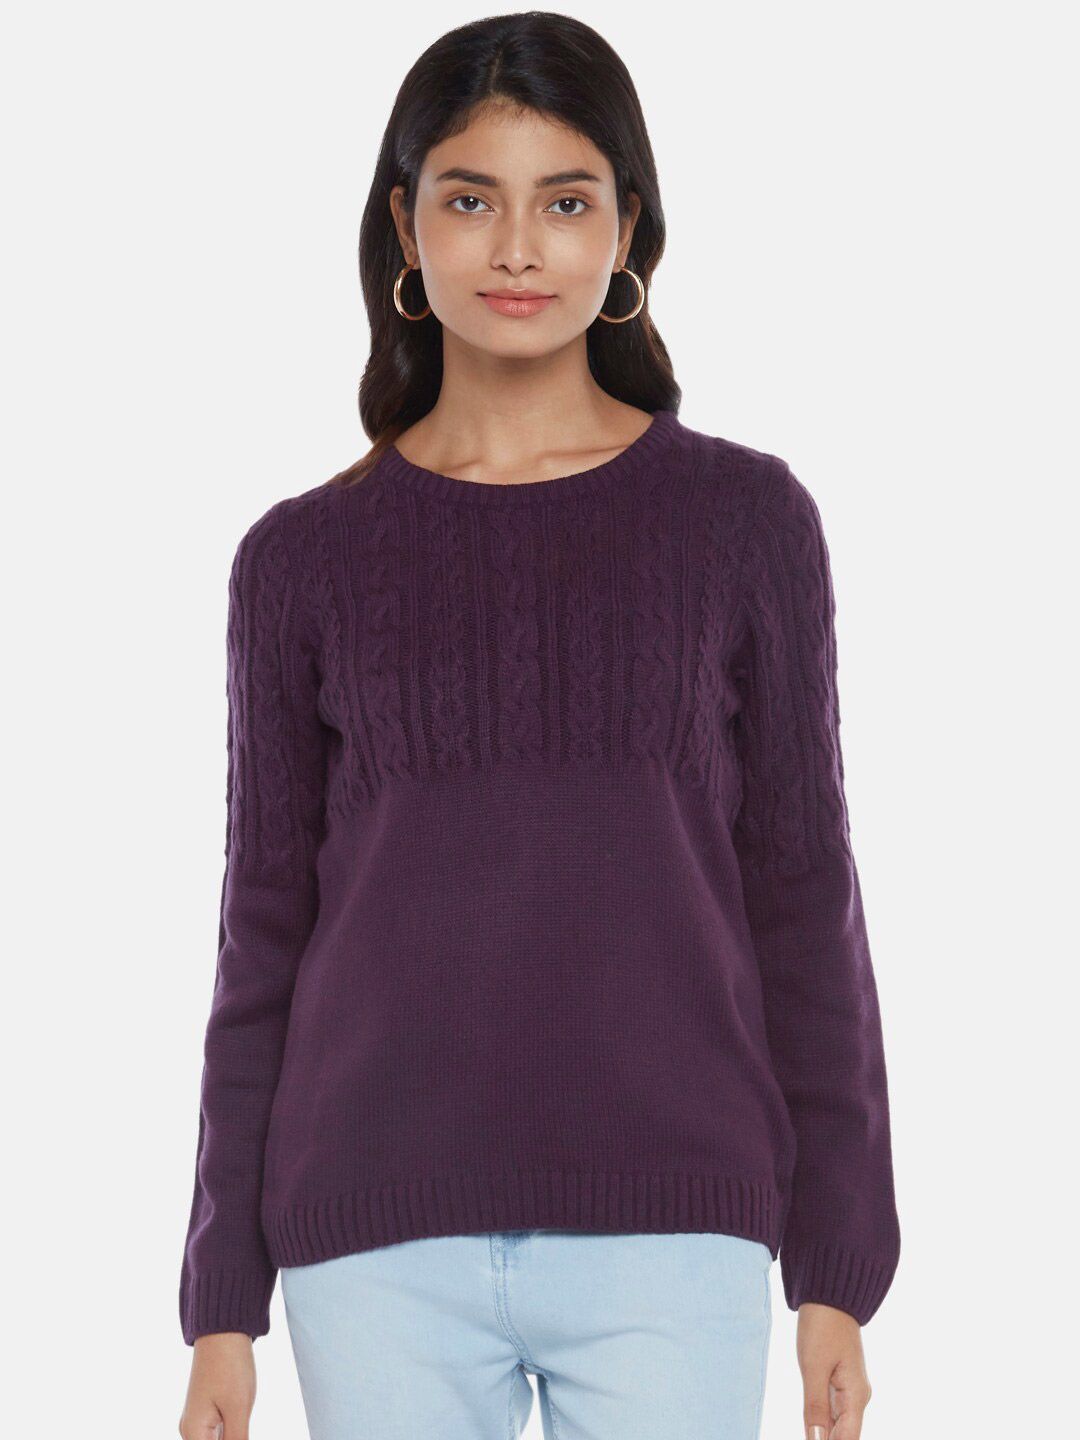 Honey by Pantaloons Women Purple Cable Knit Pullover Sweater Price in India